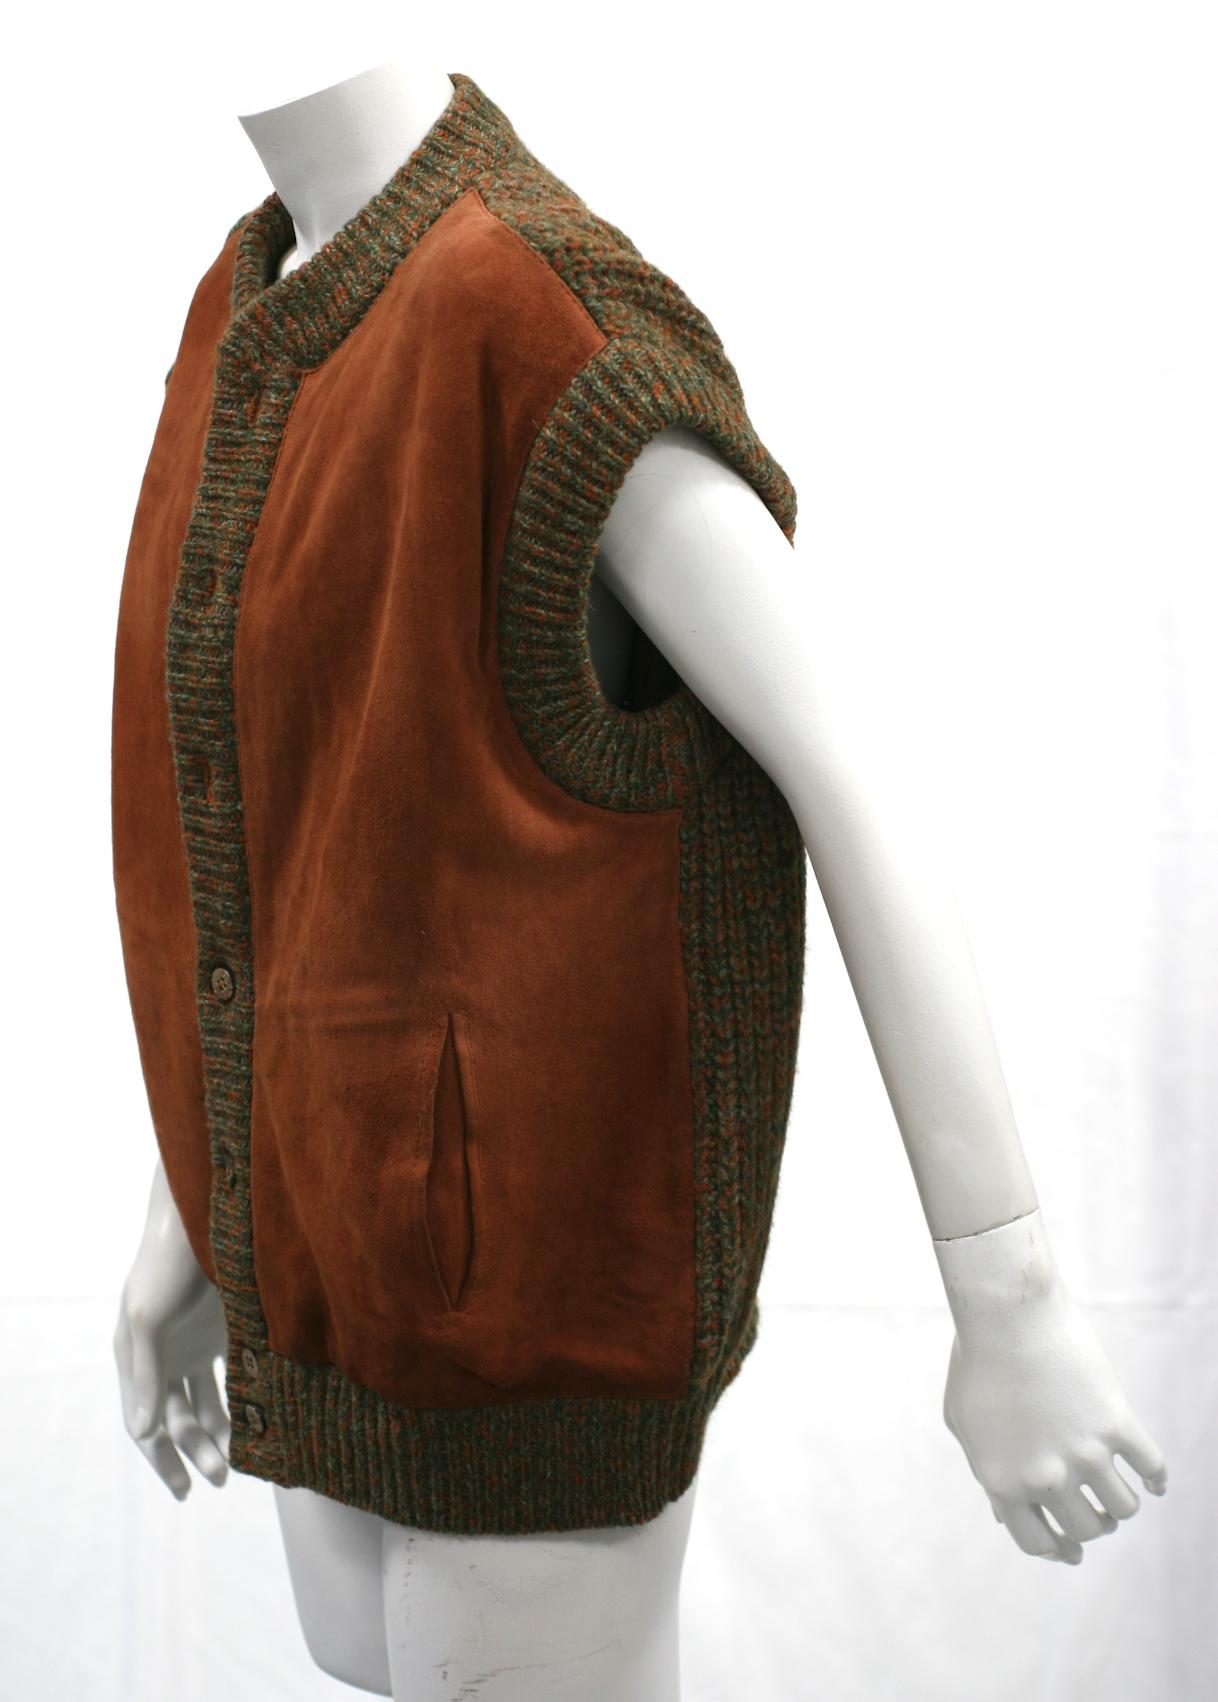 Hermes Rust Suede and Heather Ribbed Knit Vest suitable for men or women. Easy slash pockets with button front.
length 25